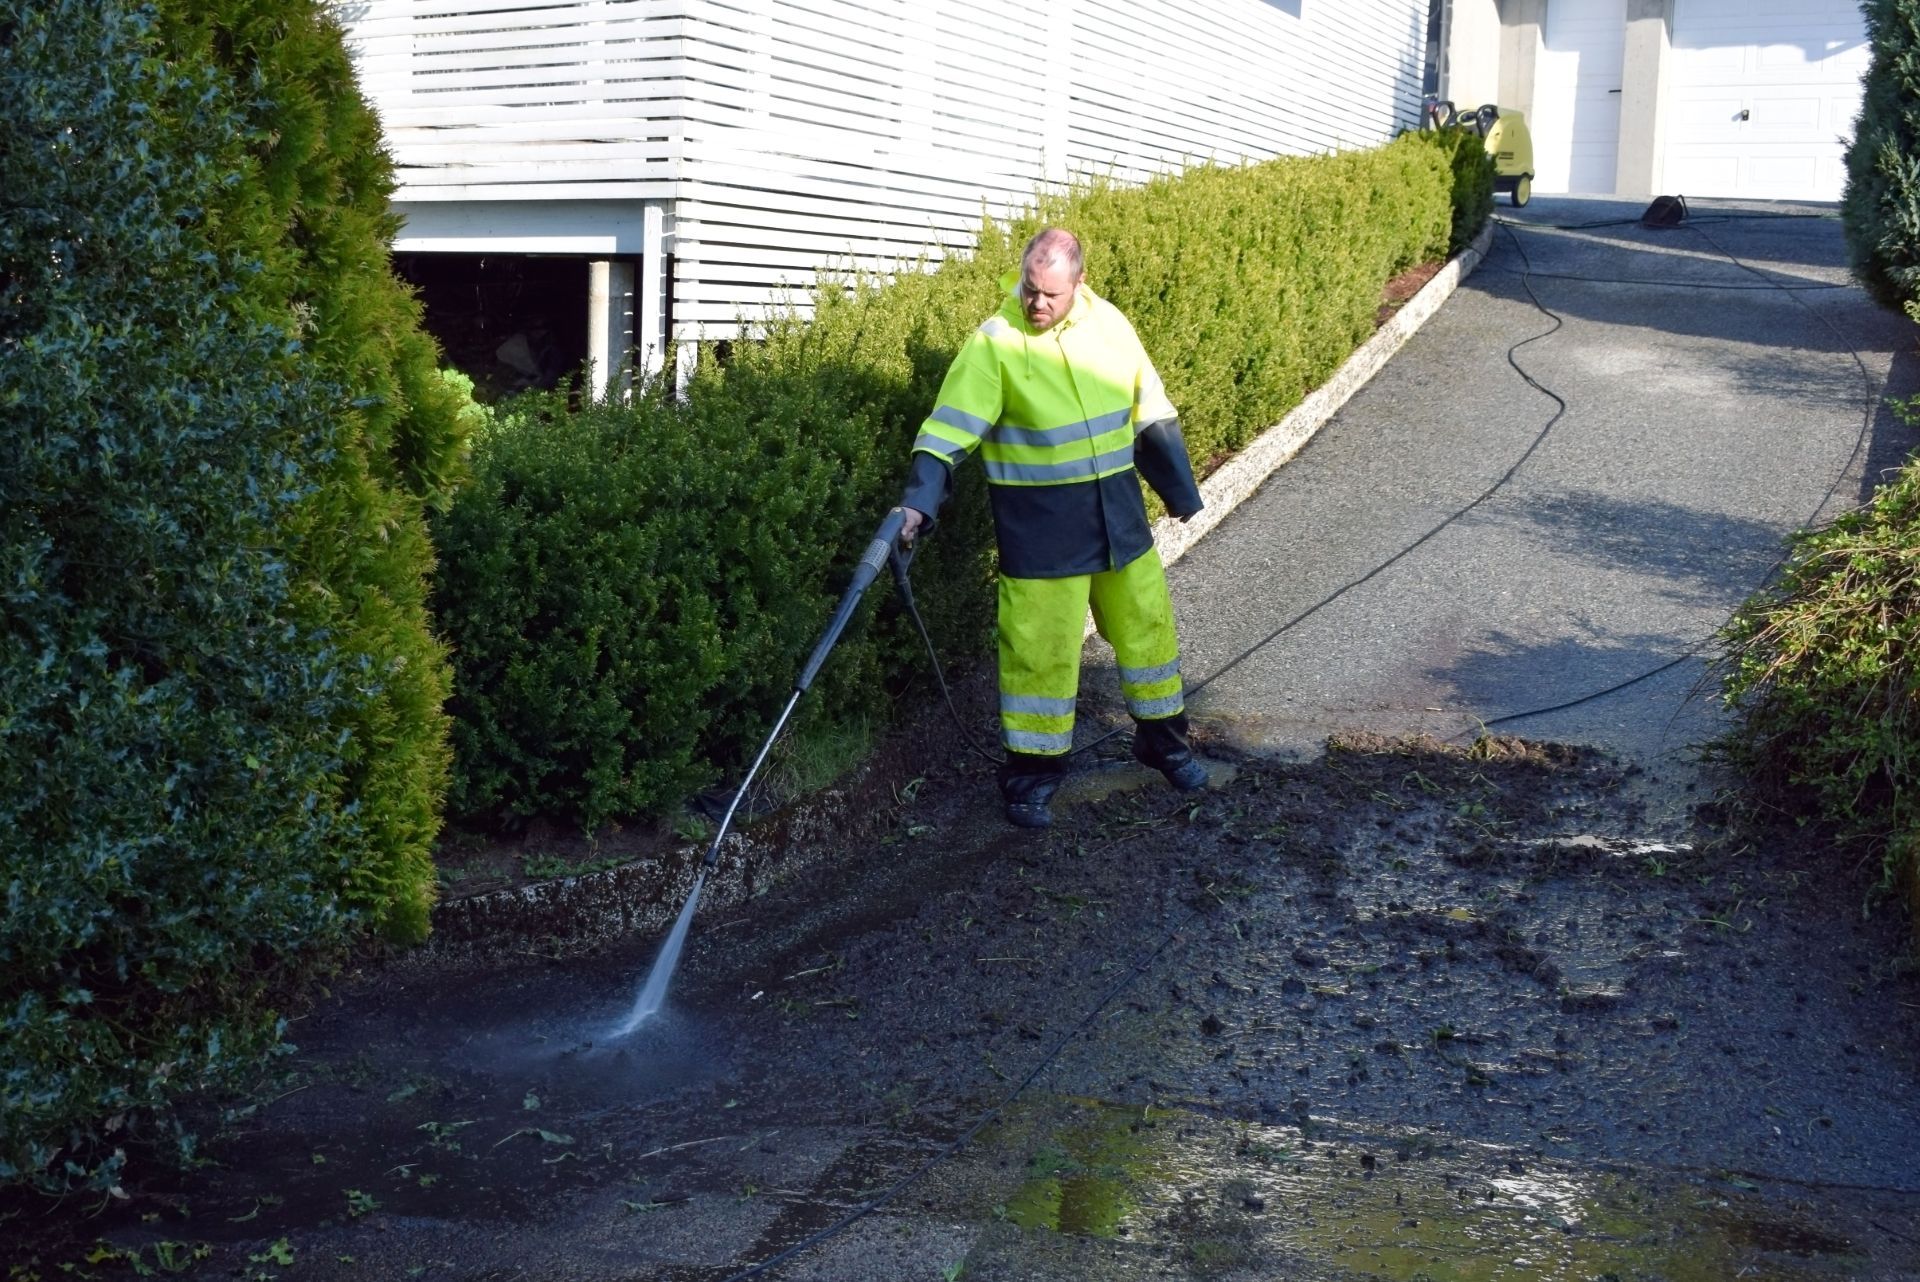 Pressure cleaning a driveway a home in Melbourne